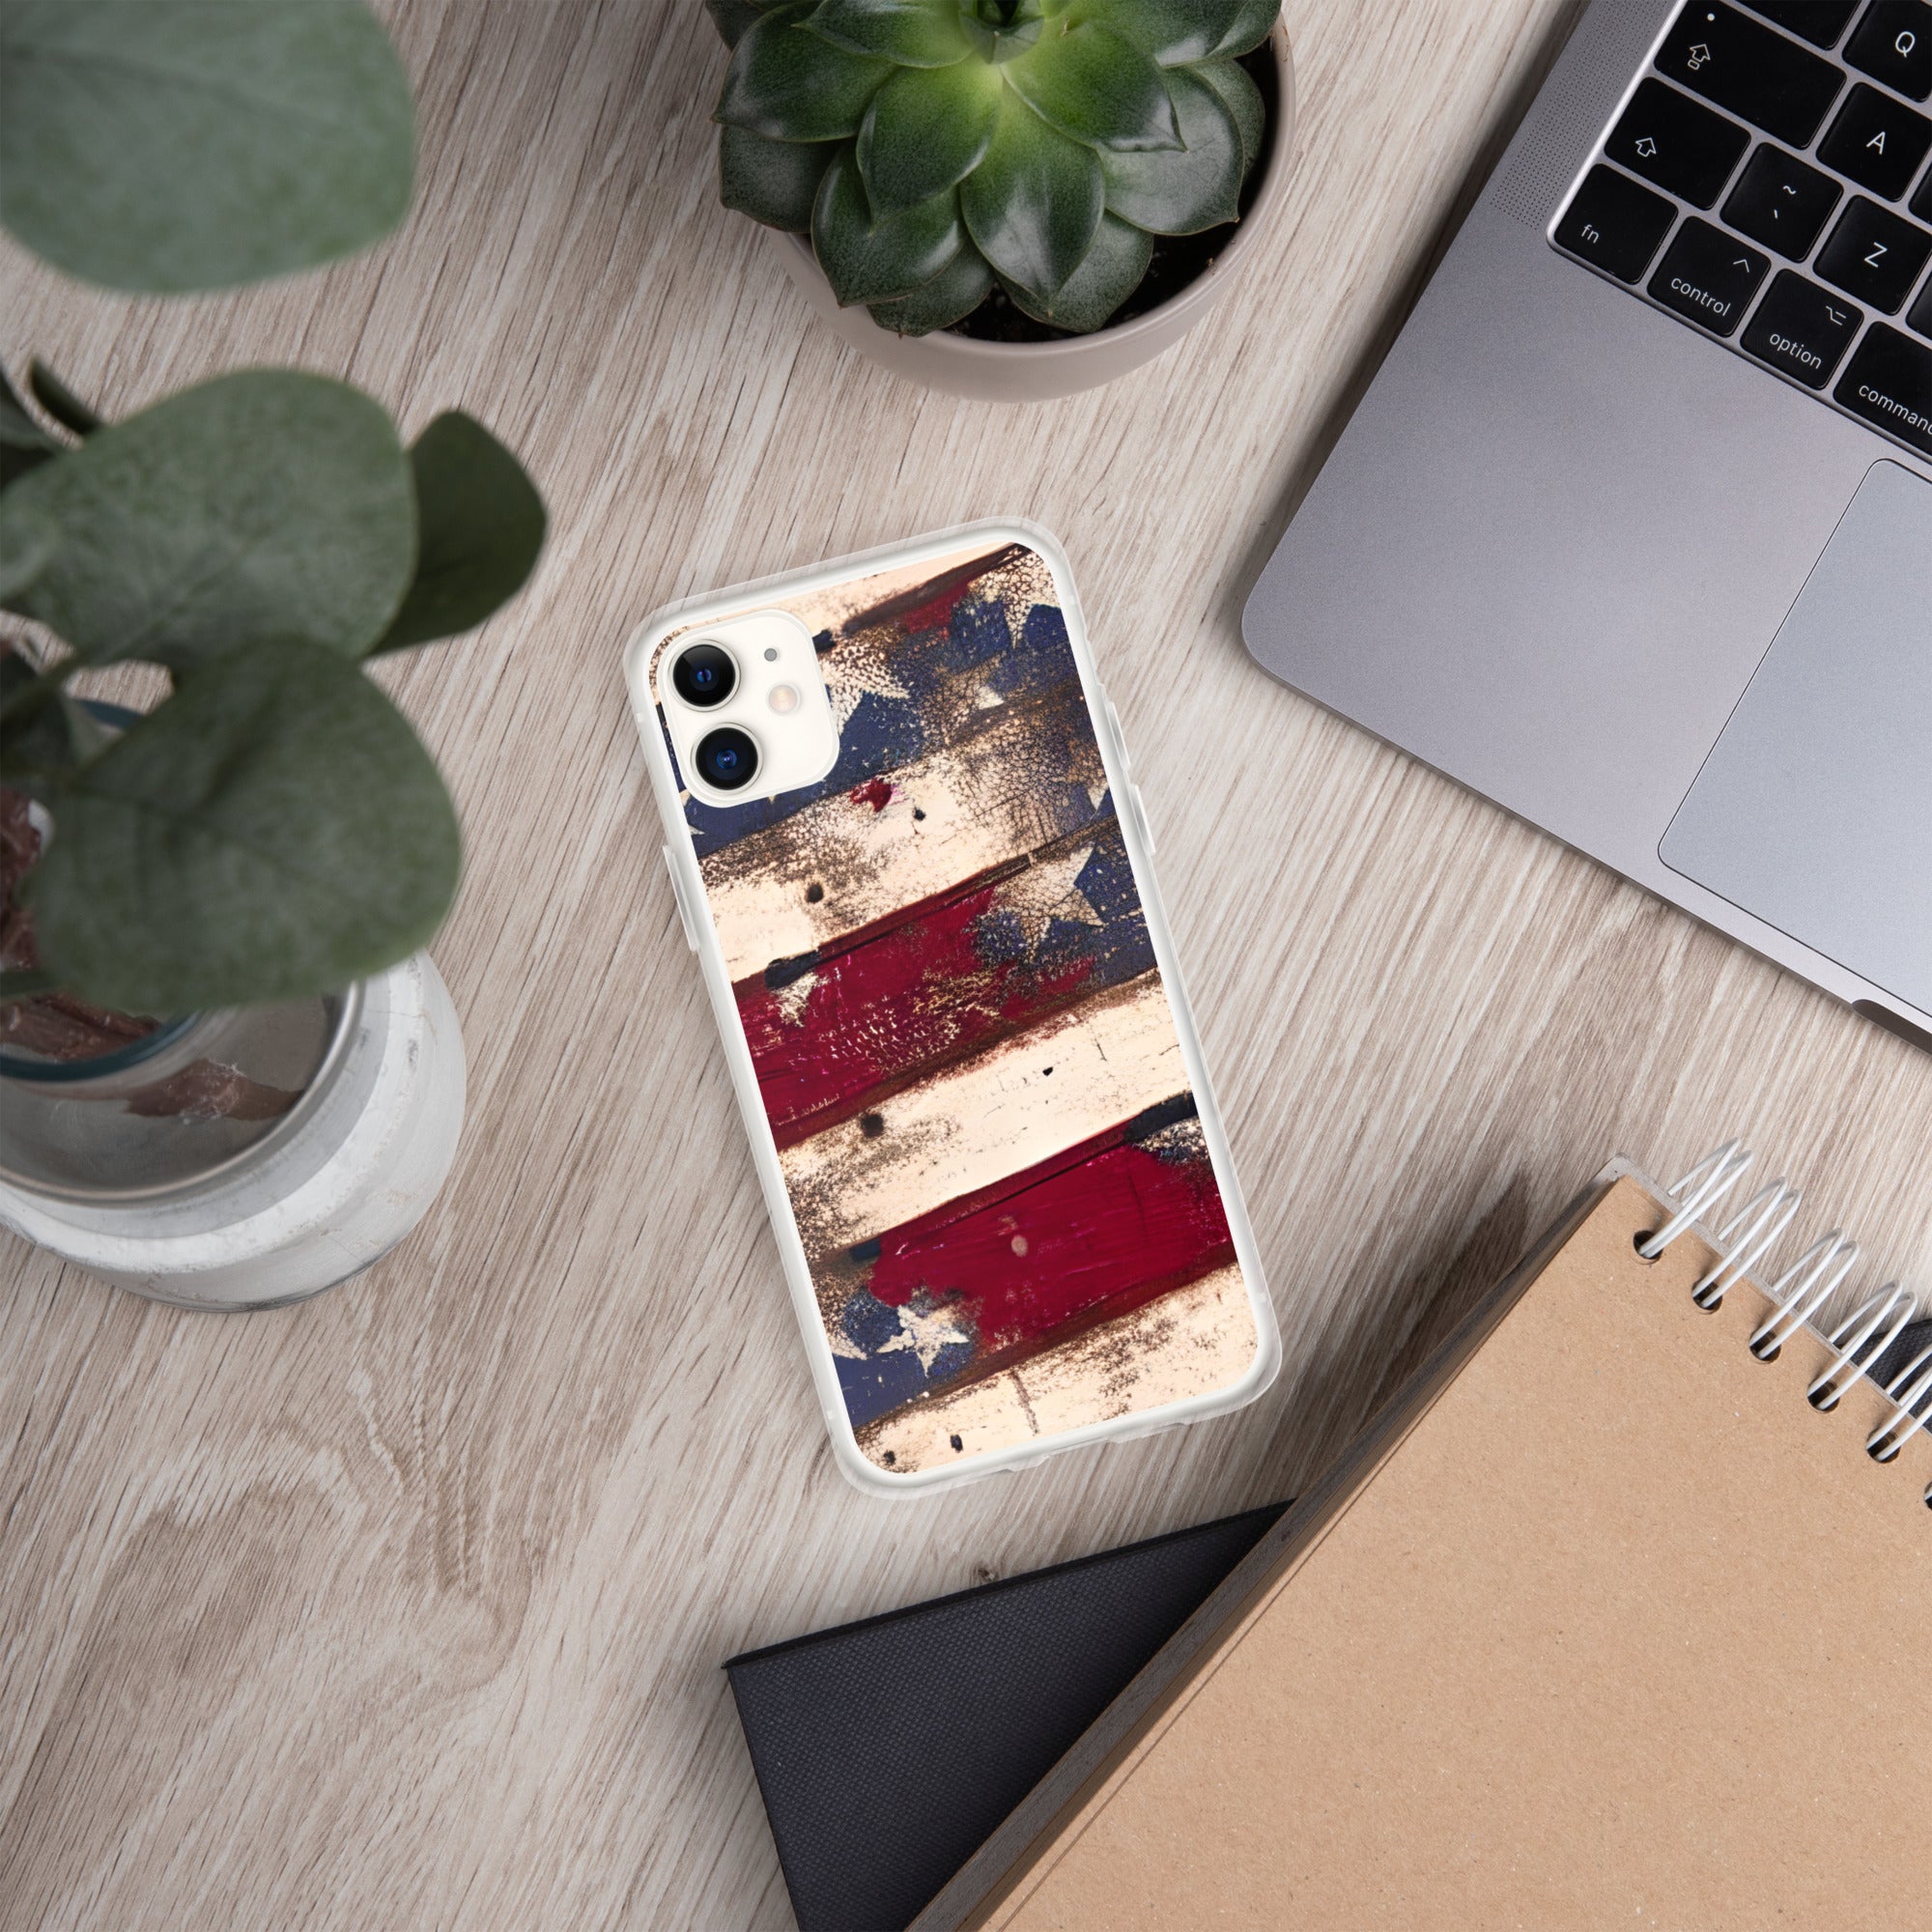 Clear Case for iPhone, Snap case for iPhone Customized, Personalize Case, Gift, Back To School